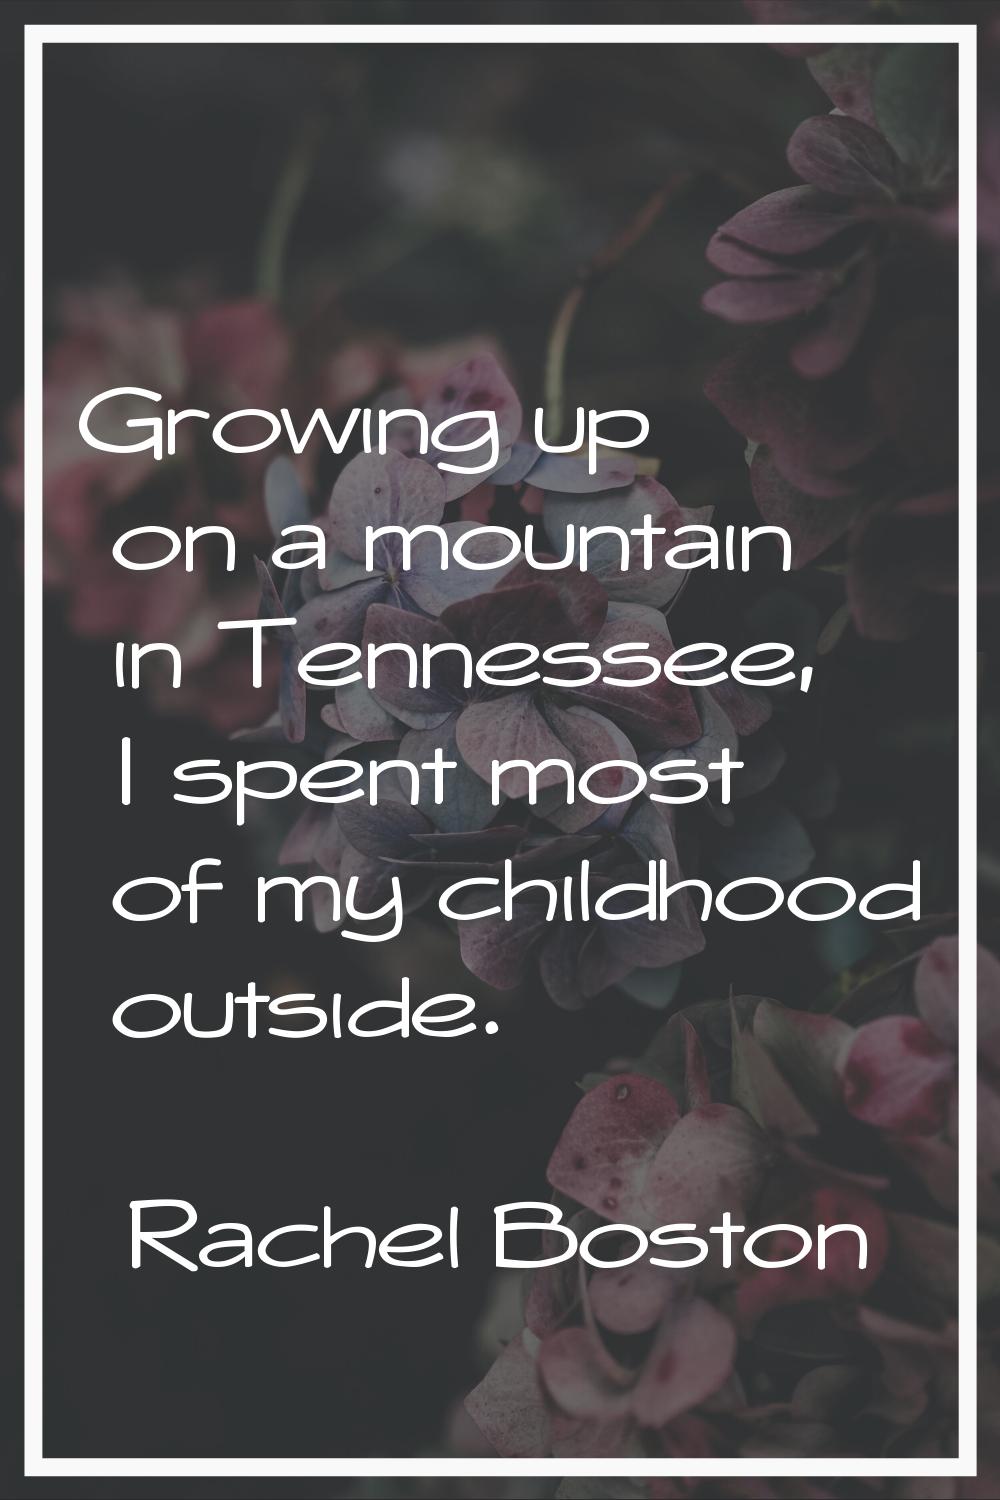 Growing up on a mountain in Tennessee, I spent most of my childhood outside.